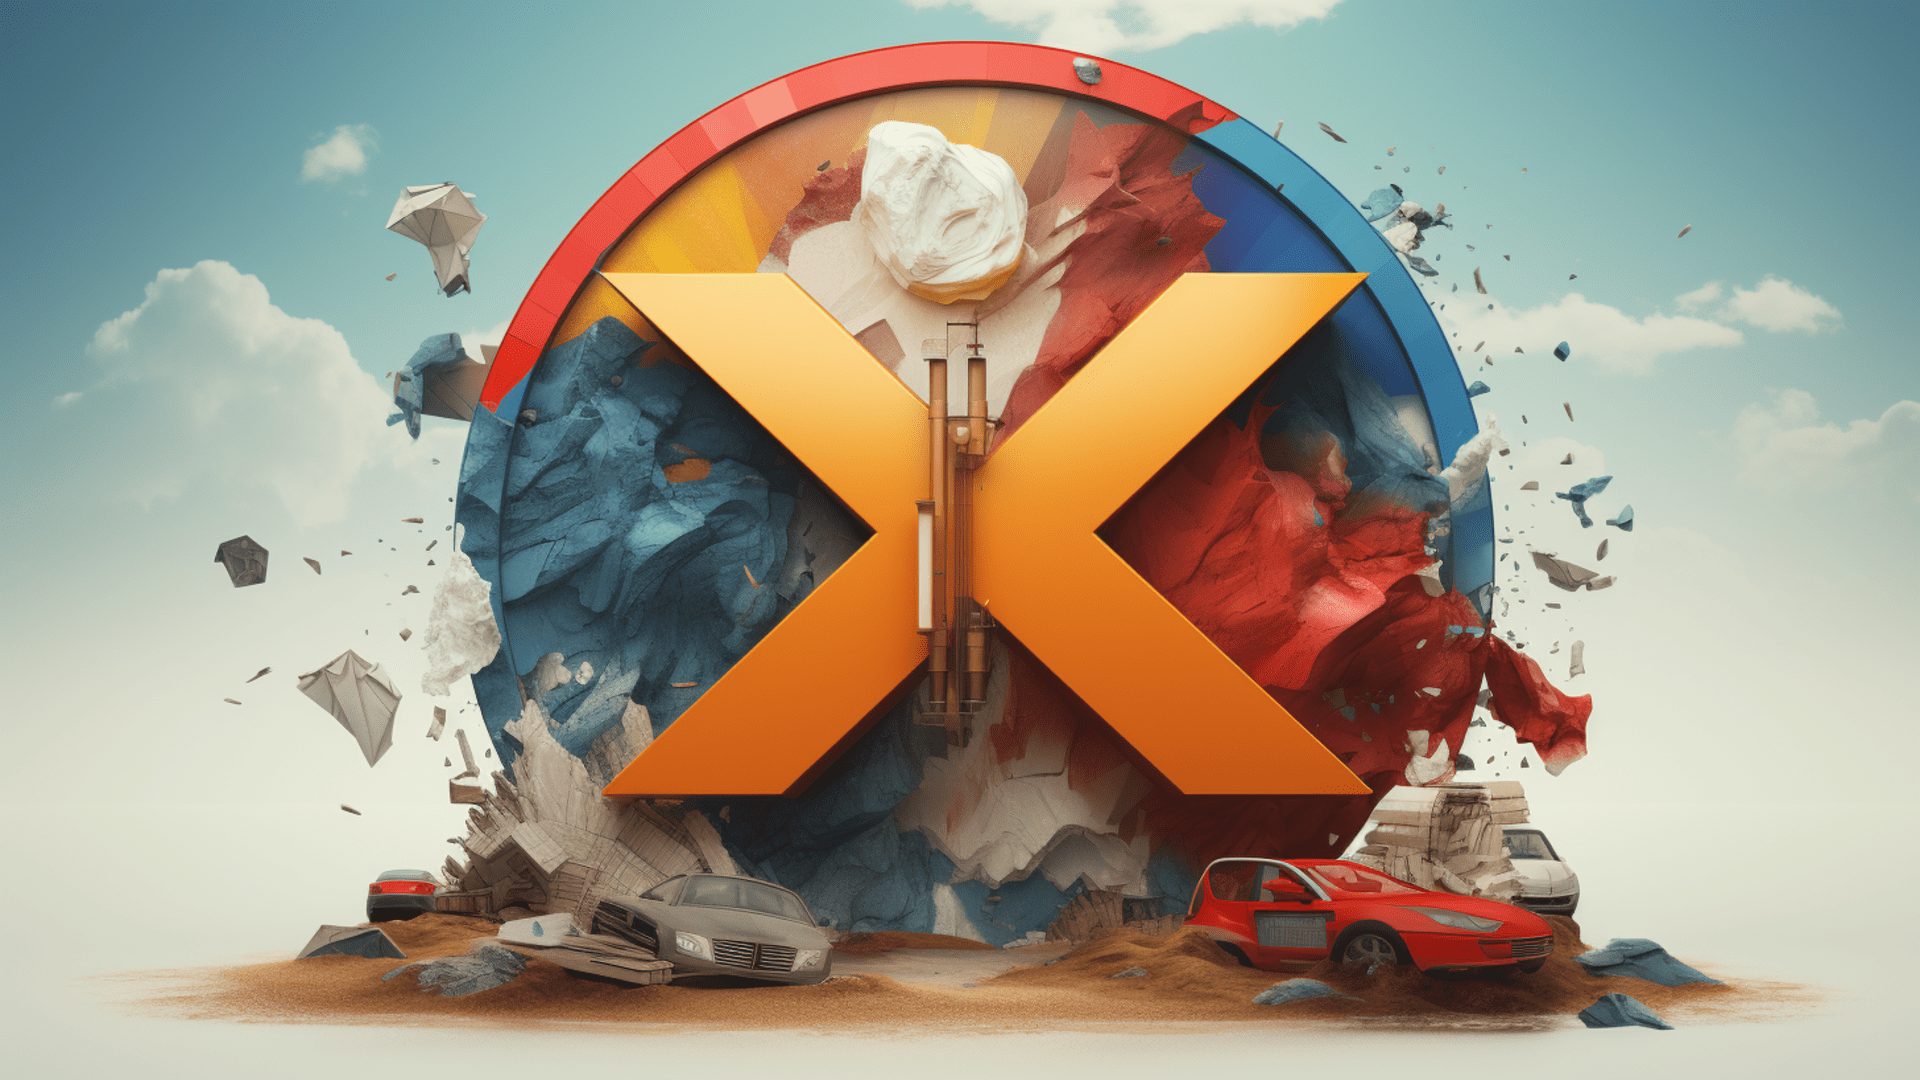 OKX Rebrands and Launches Crypto Exchange, Wallet in the Netherlands